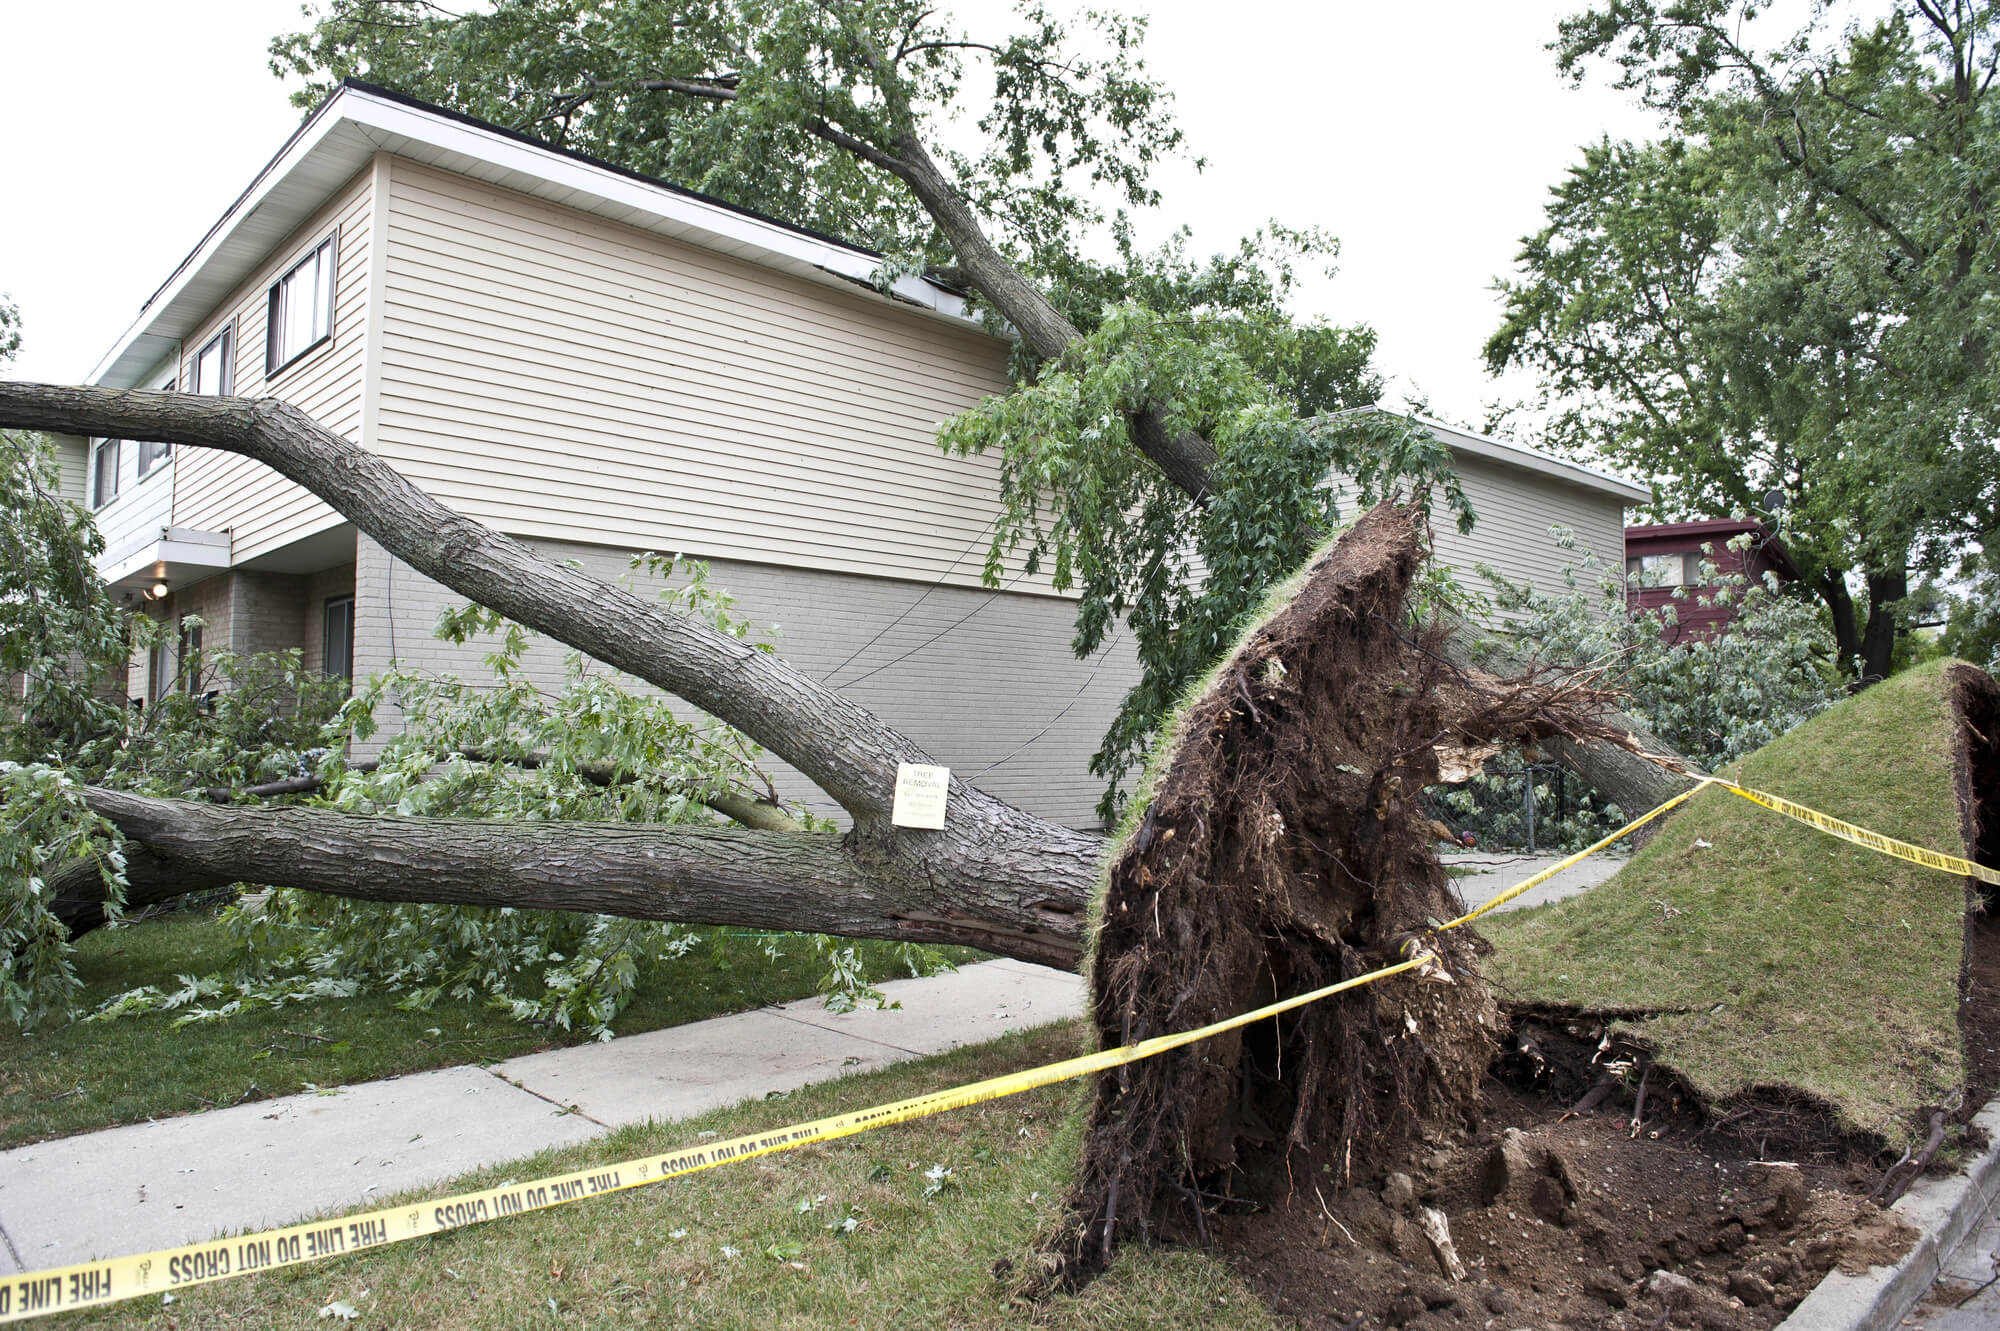 large tree fell over onto house in storm